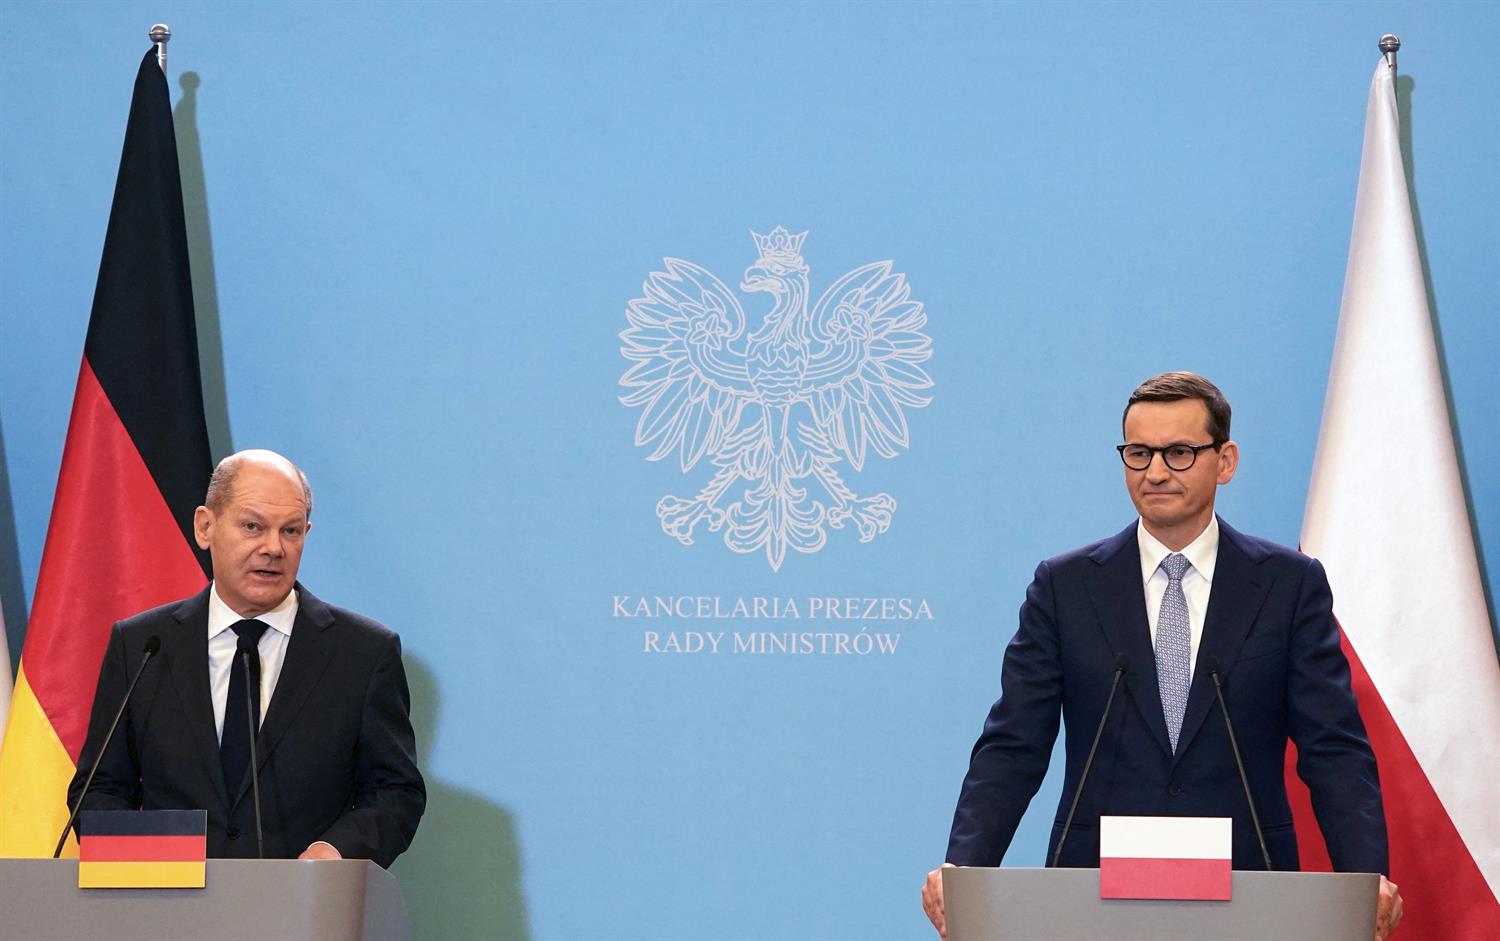 Germany in the EU after Merkel: A view from Poland